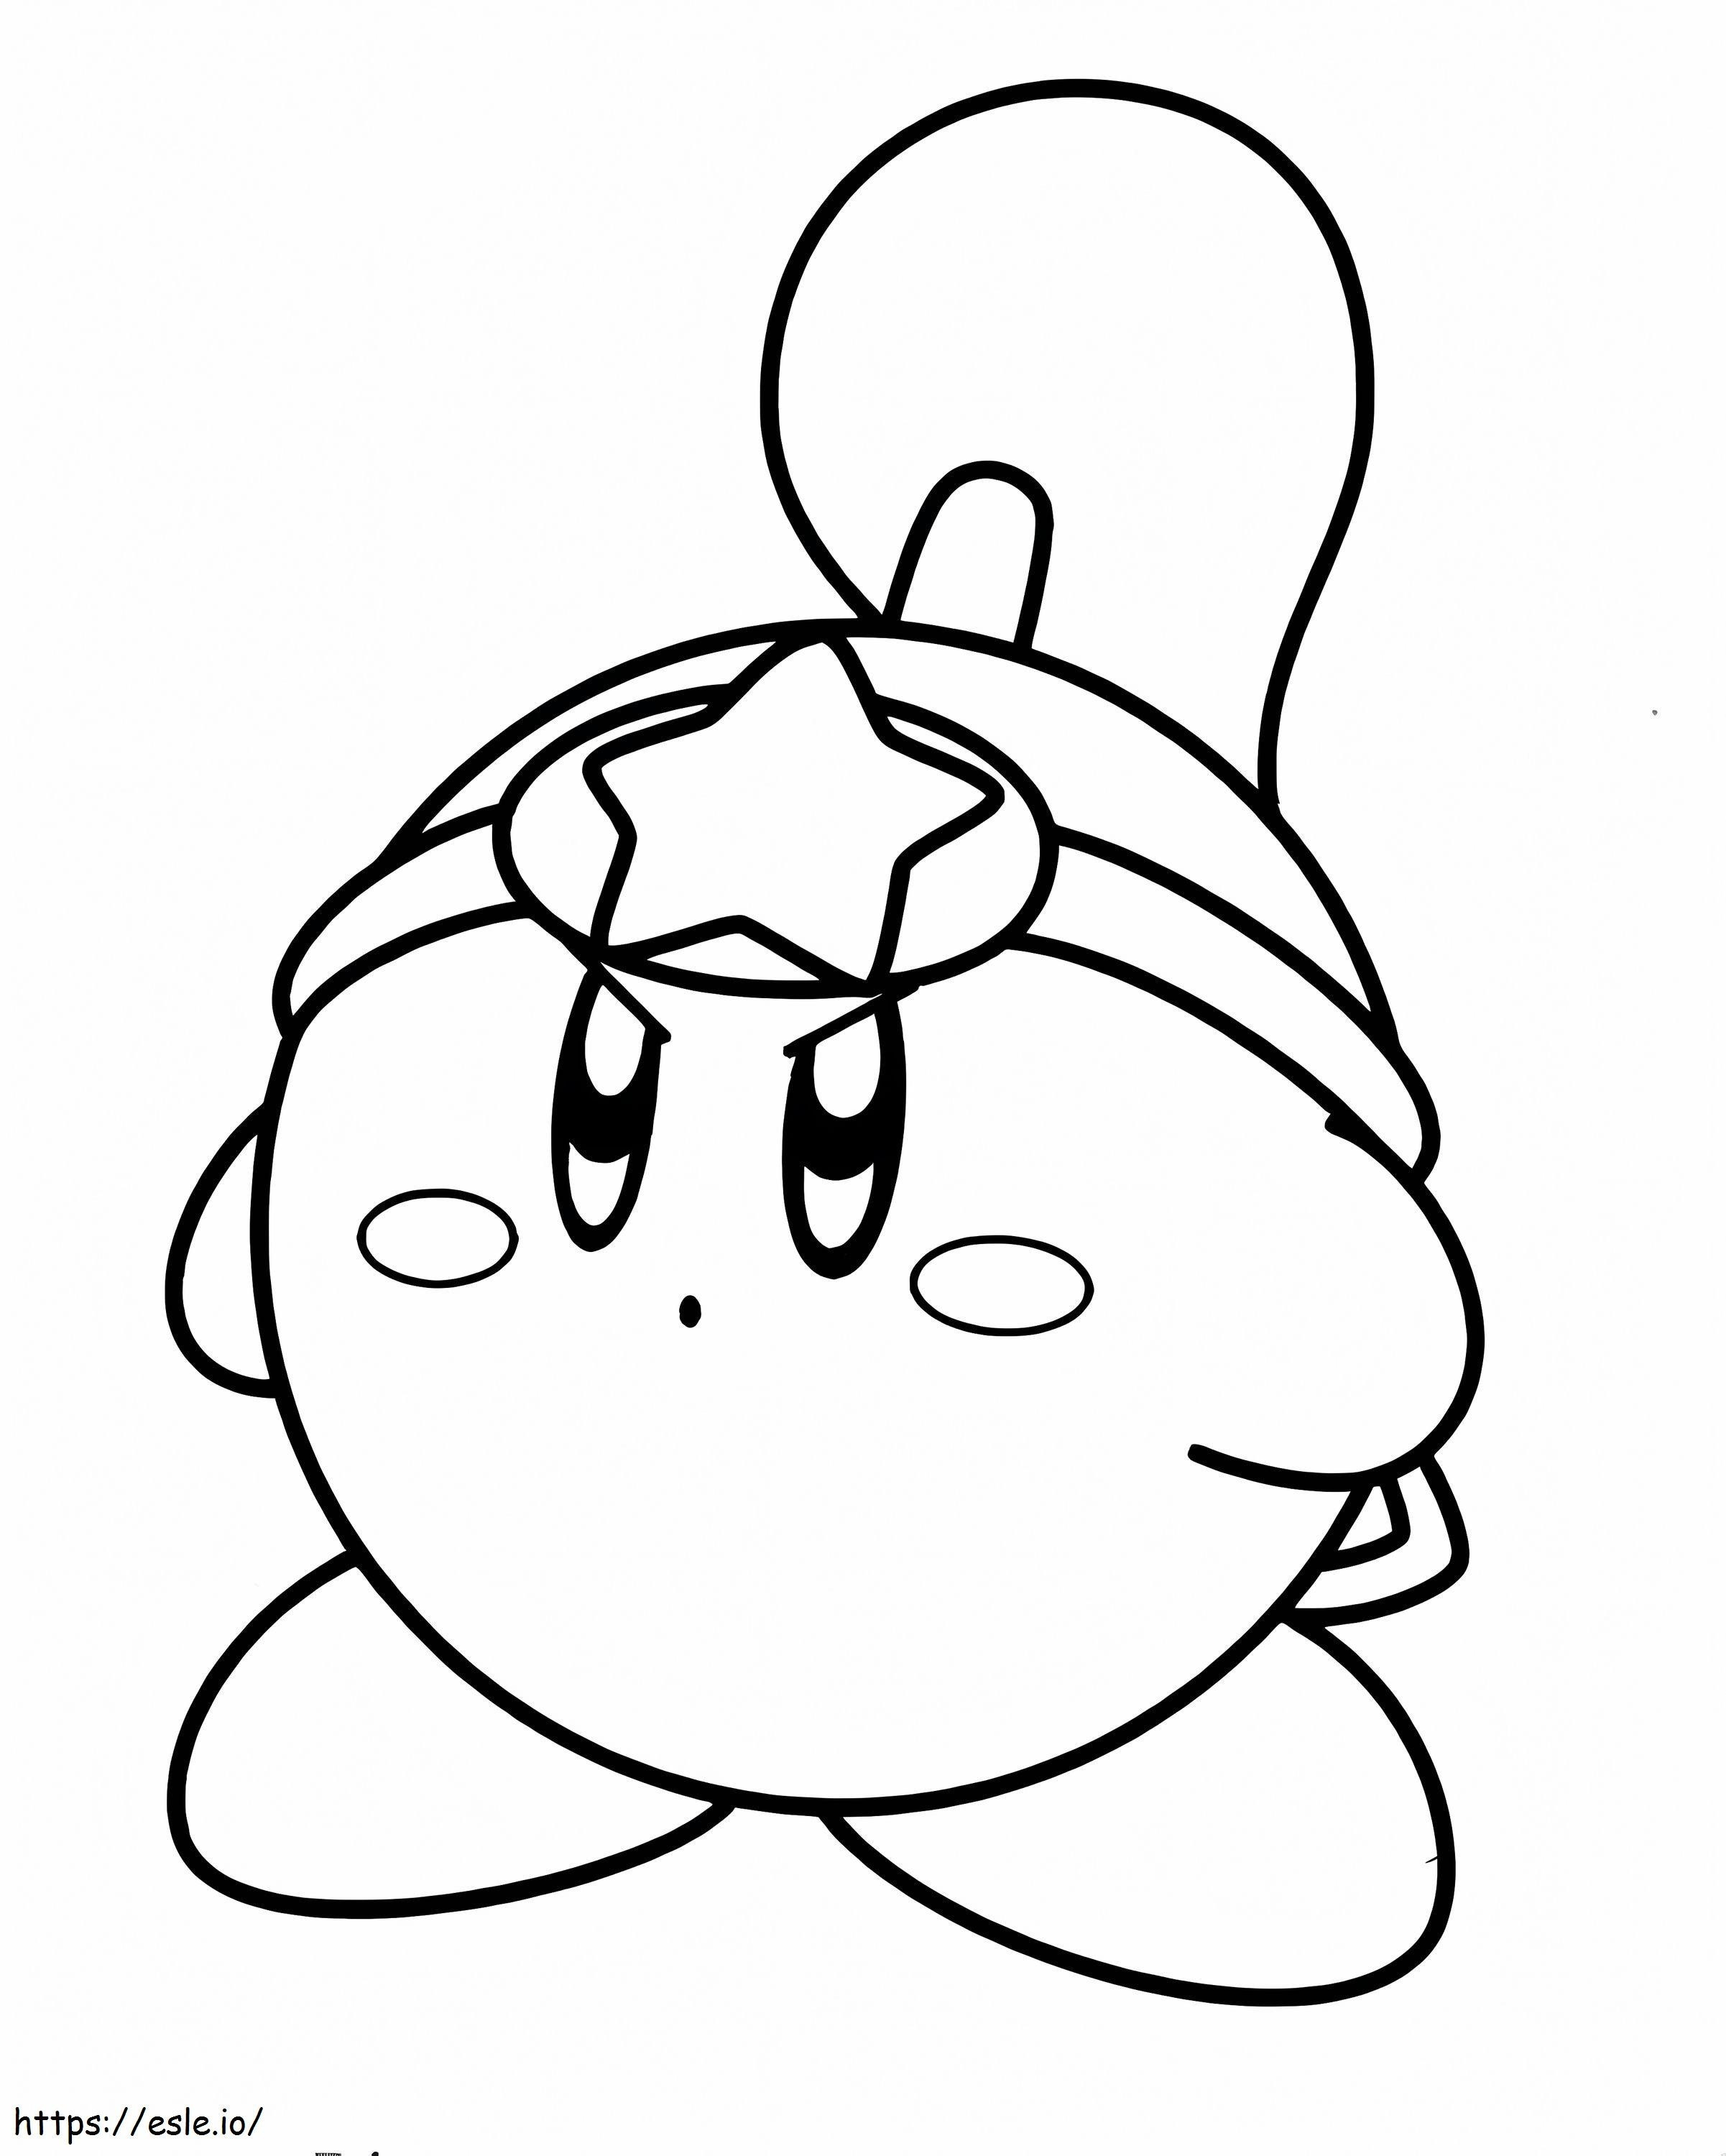 Increible Kirby coloring page